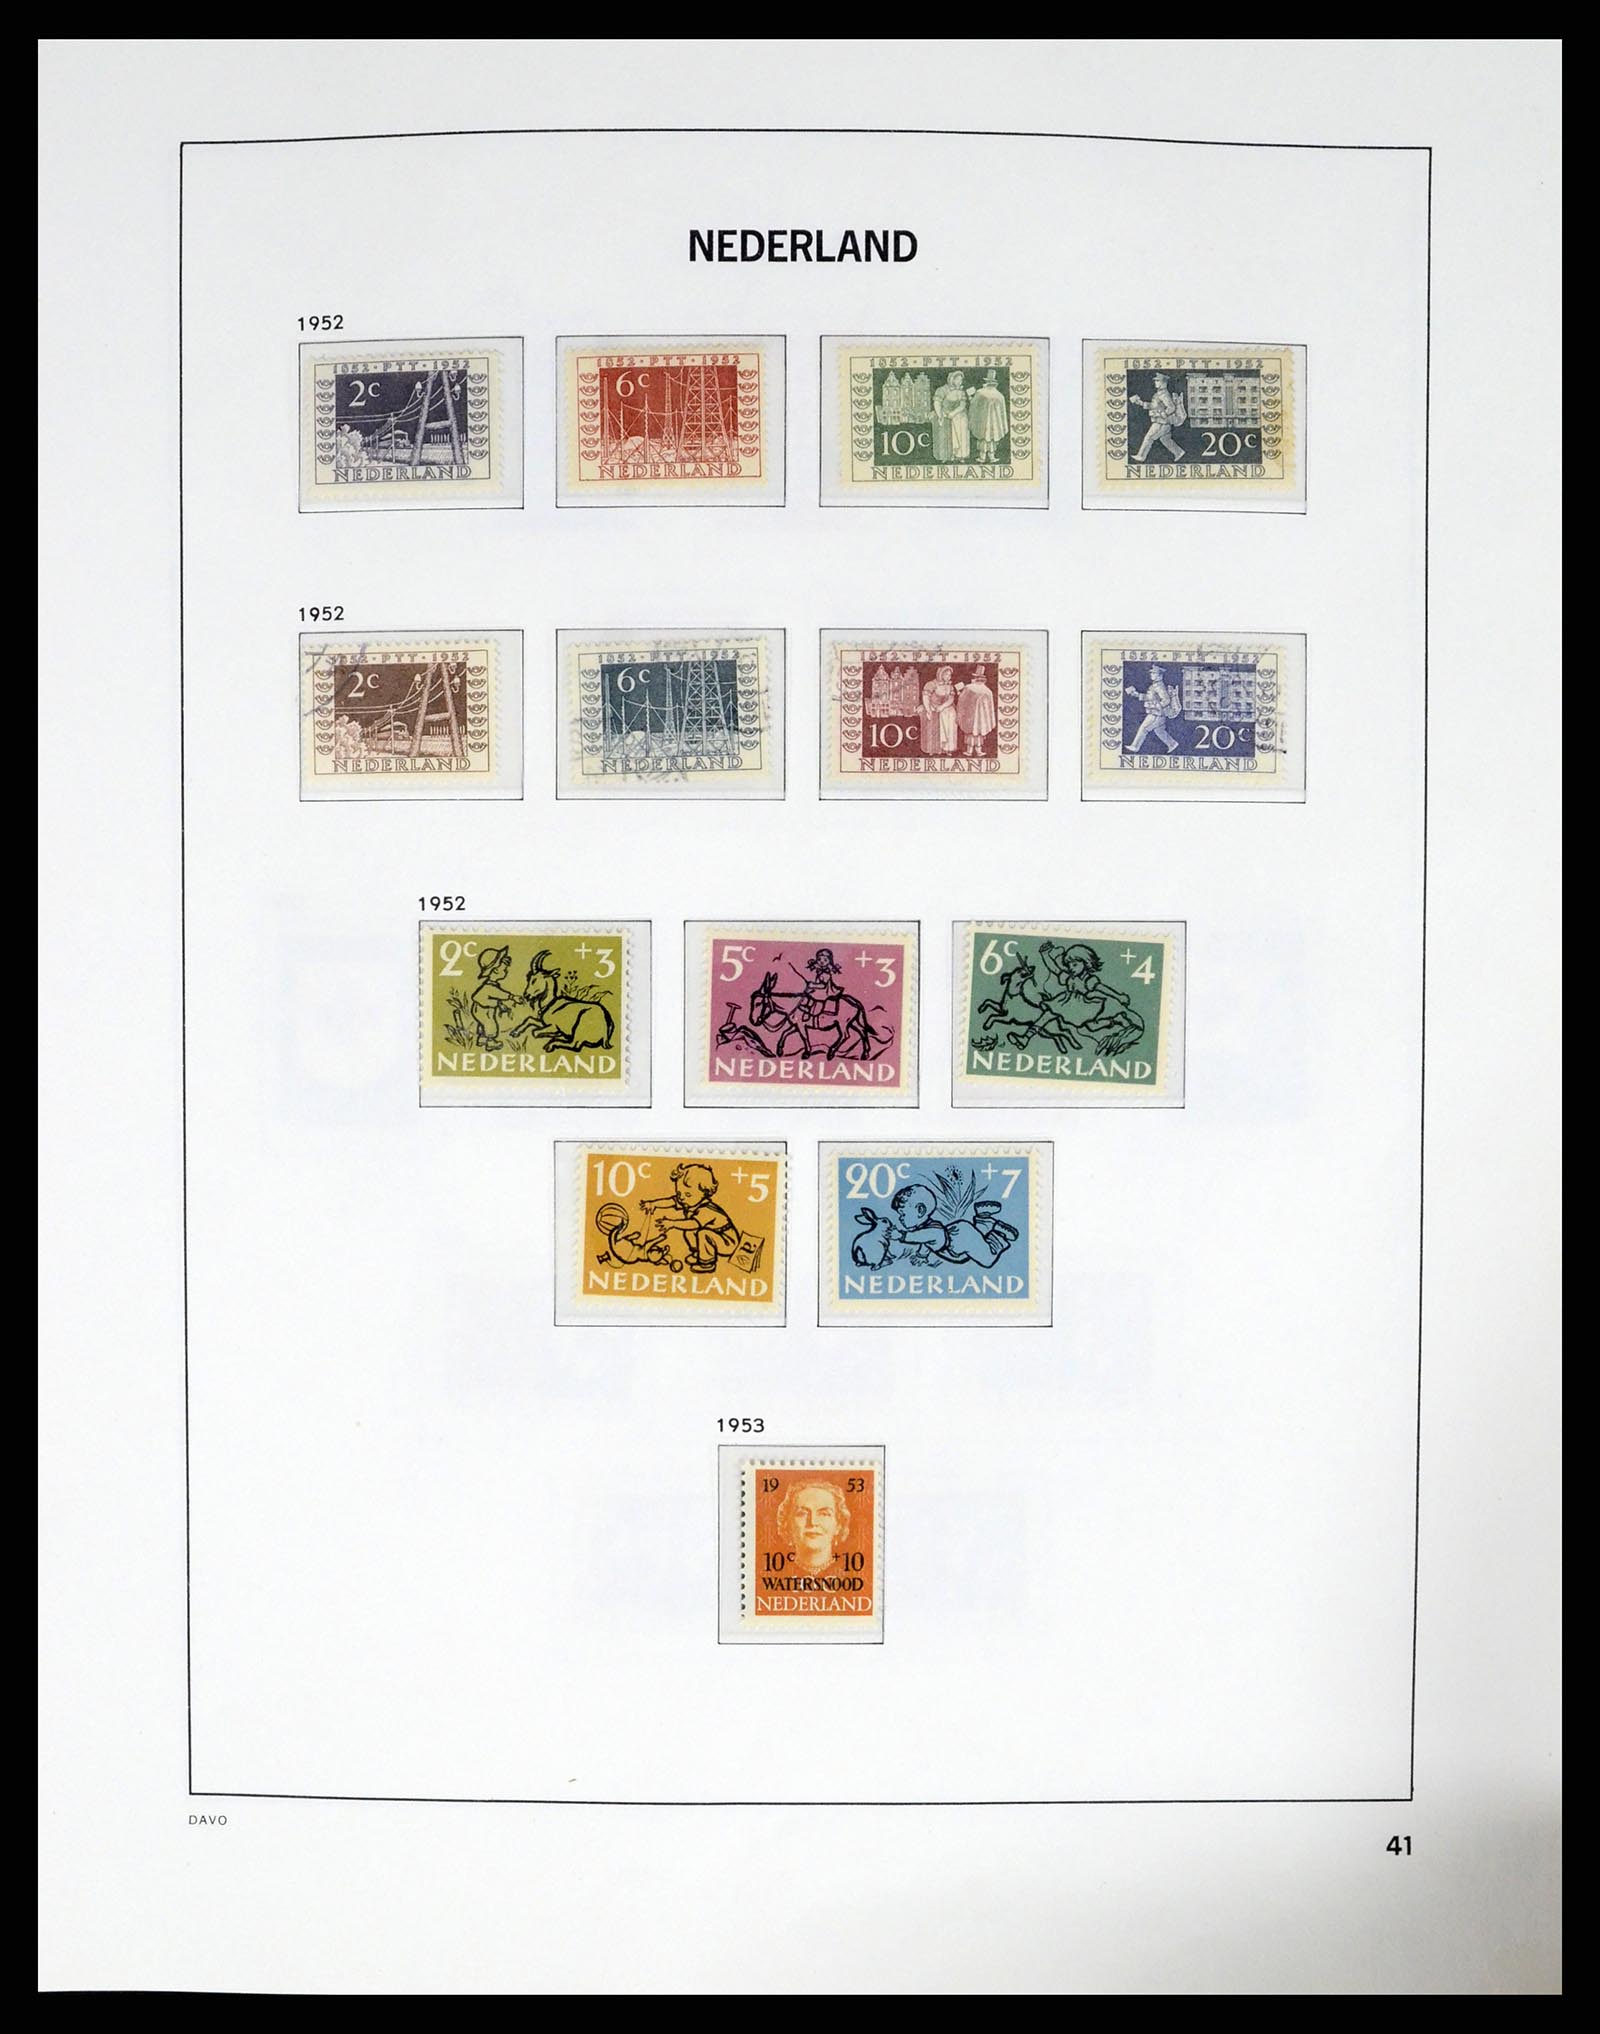 37294 040 - Stamp collection 37294 Netherlands 1852-2001.